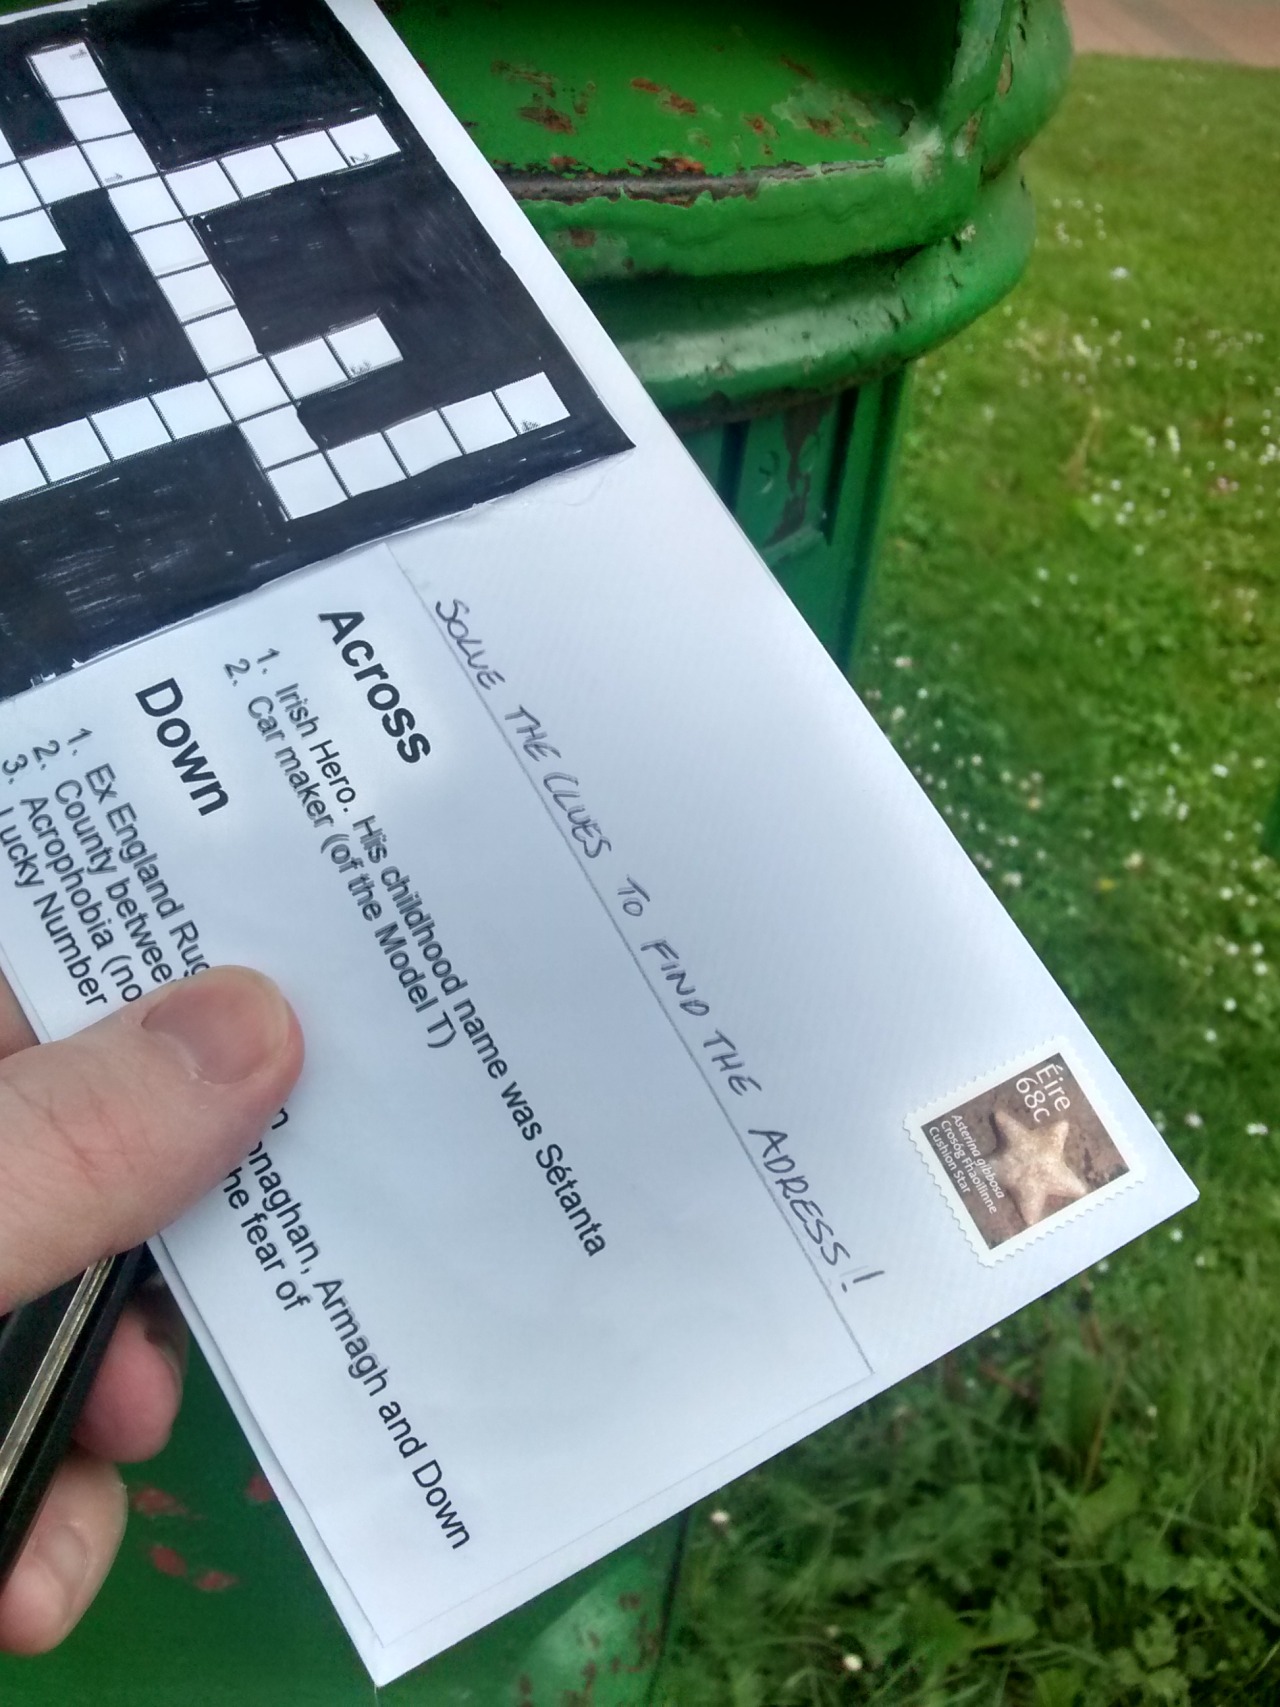 Crossword puzzle. Delivered As Patton said about Rommel “You magnificent bastard”